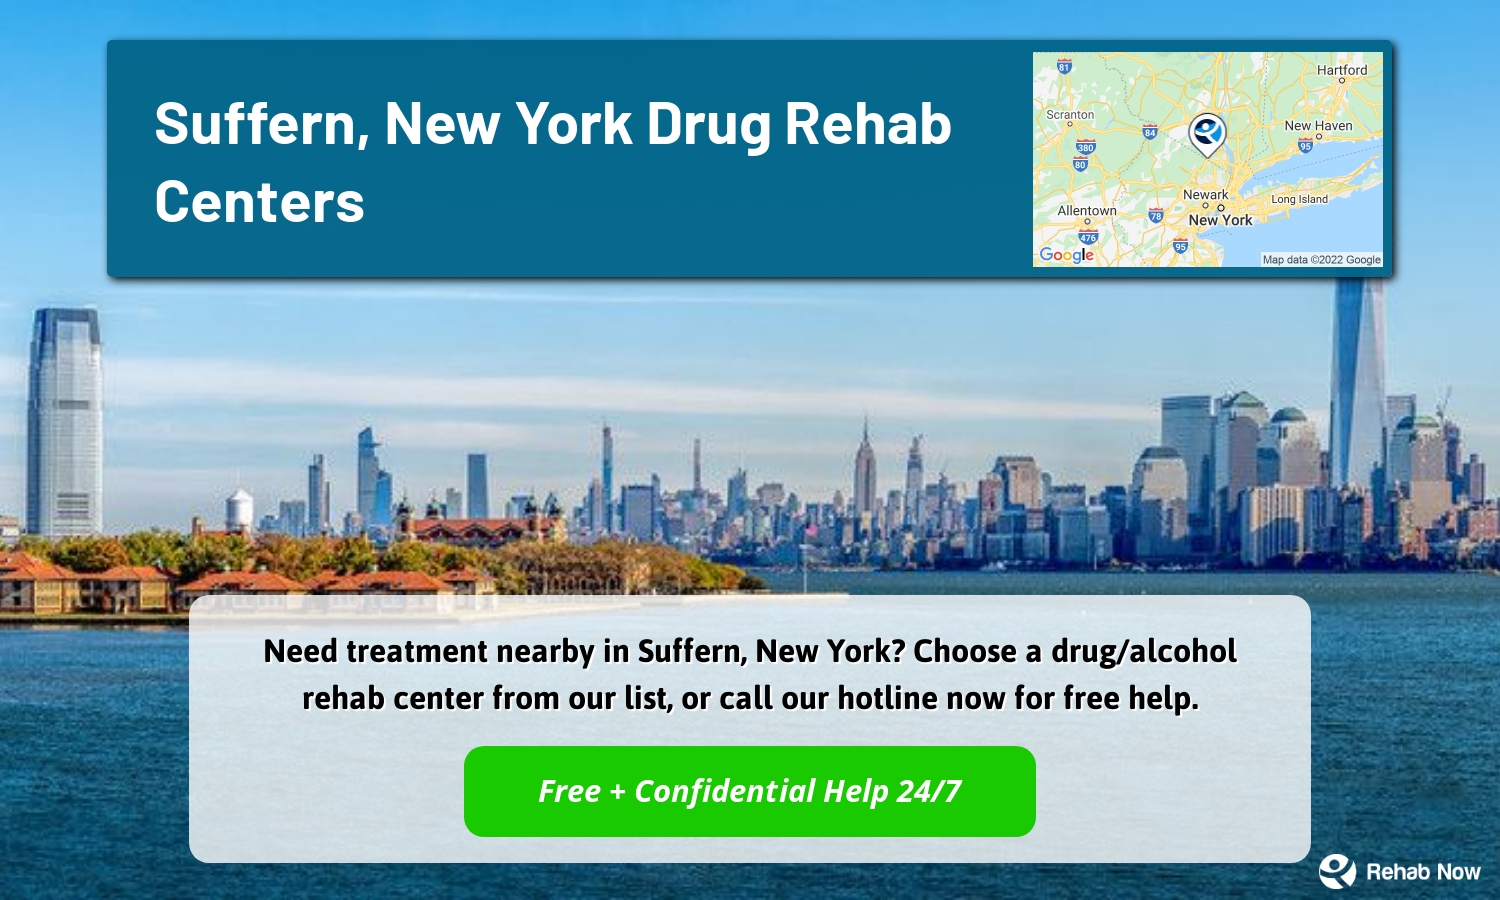 Need treatment nearby in Suffern, New York? Choose a drug/alcohol rehab center from our list, or call our hotline now for free help.